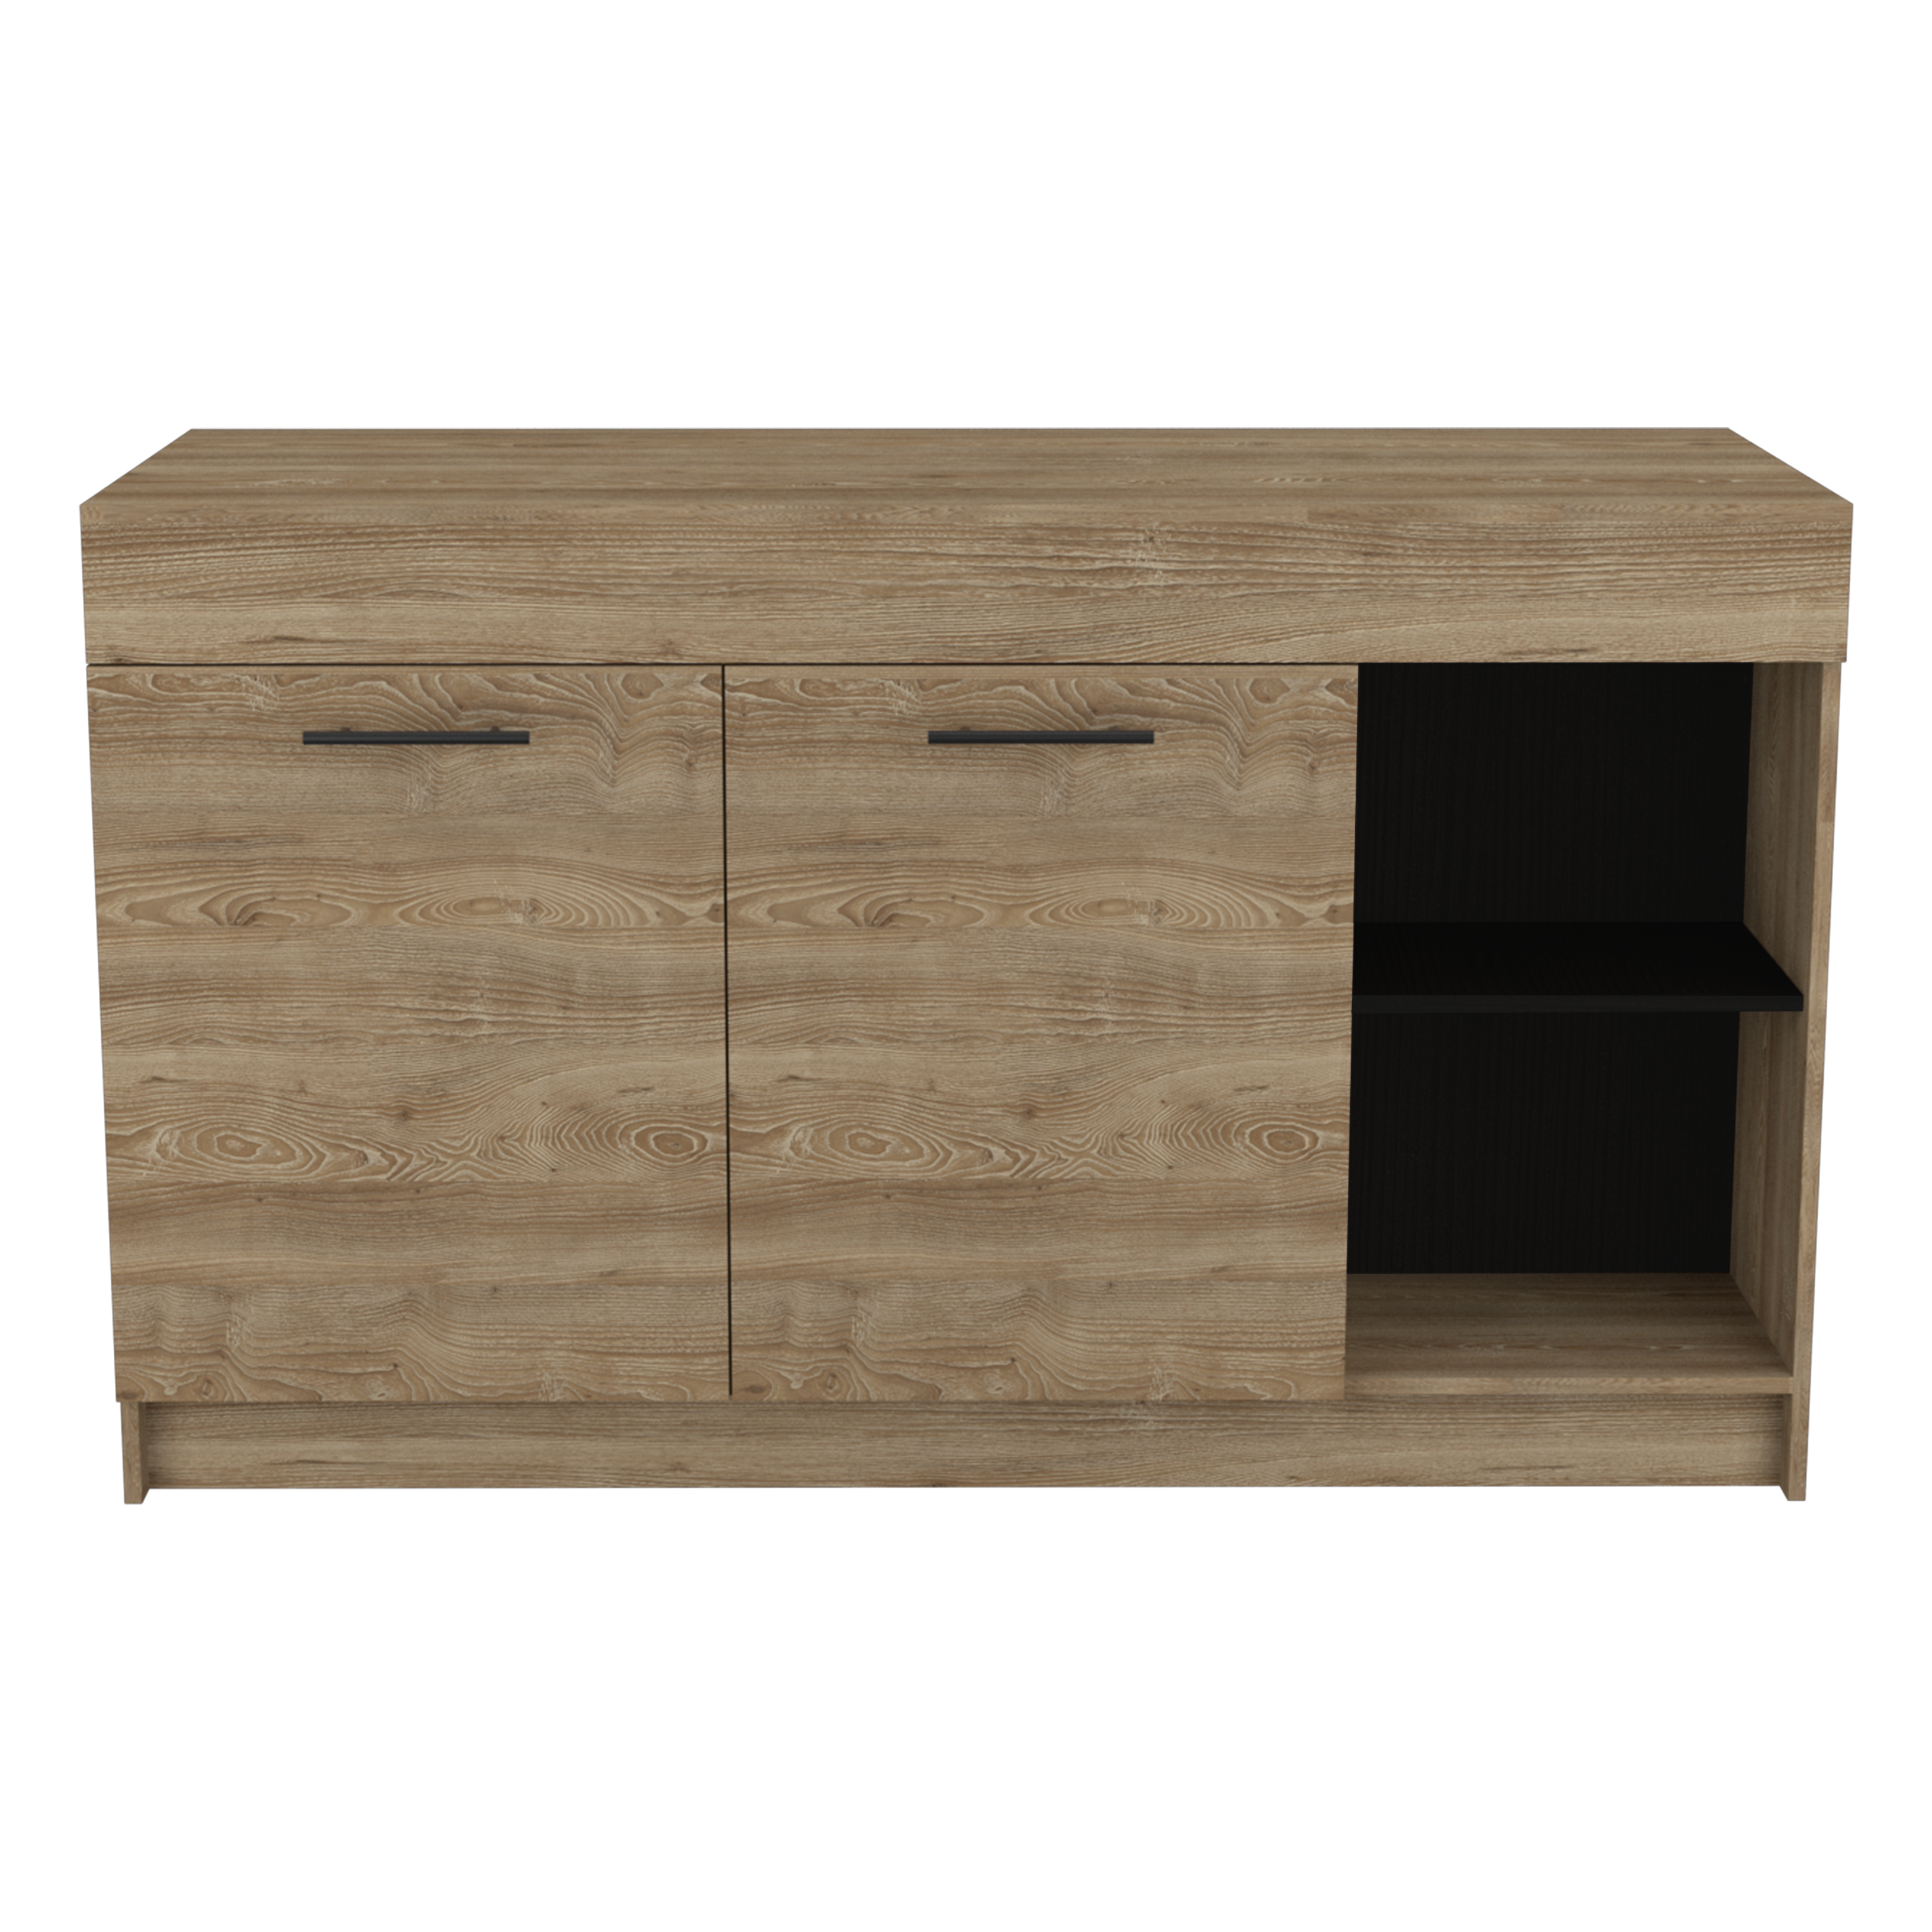 Luna kitchen bar with two swing doors Miel+Wengue